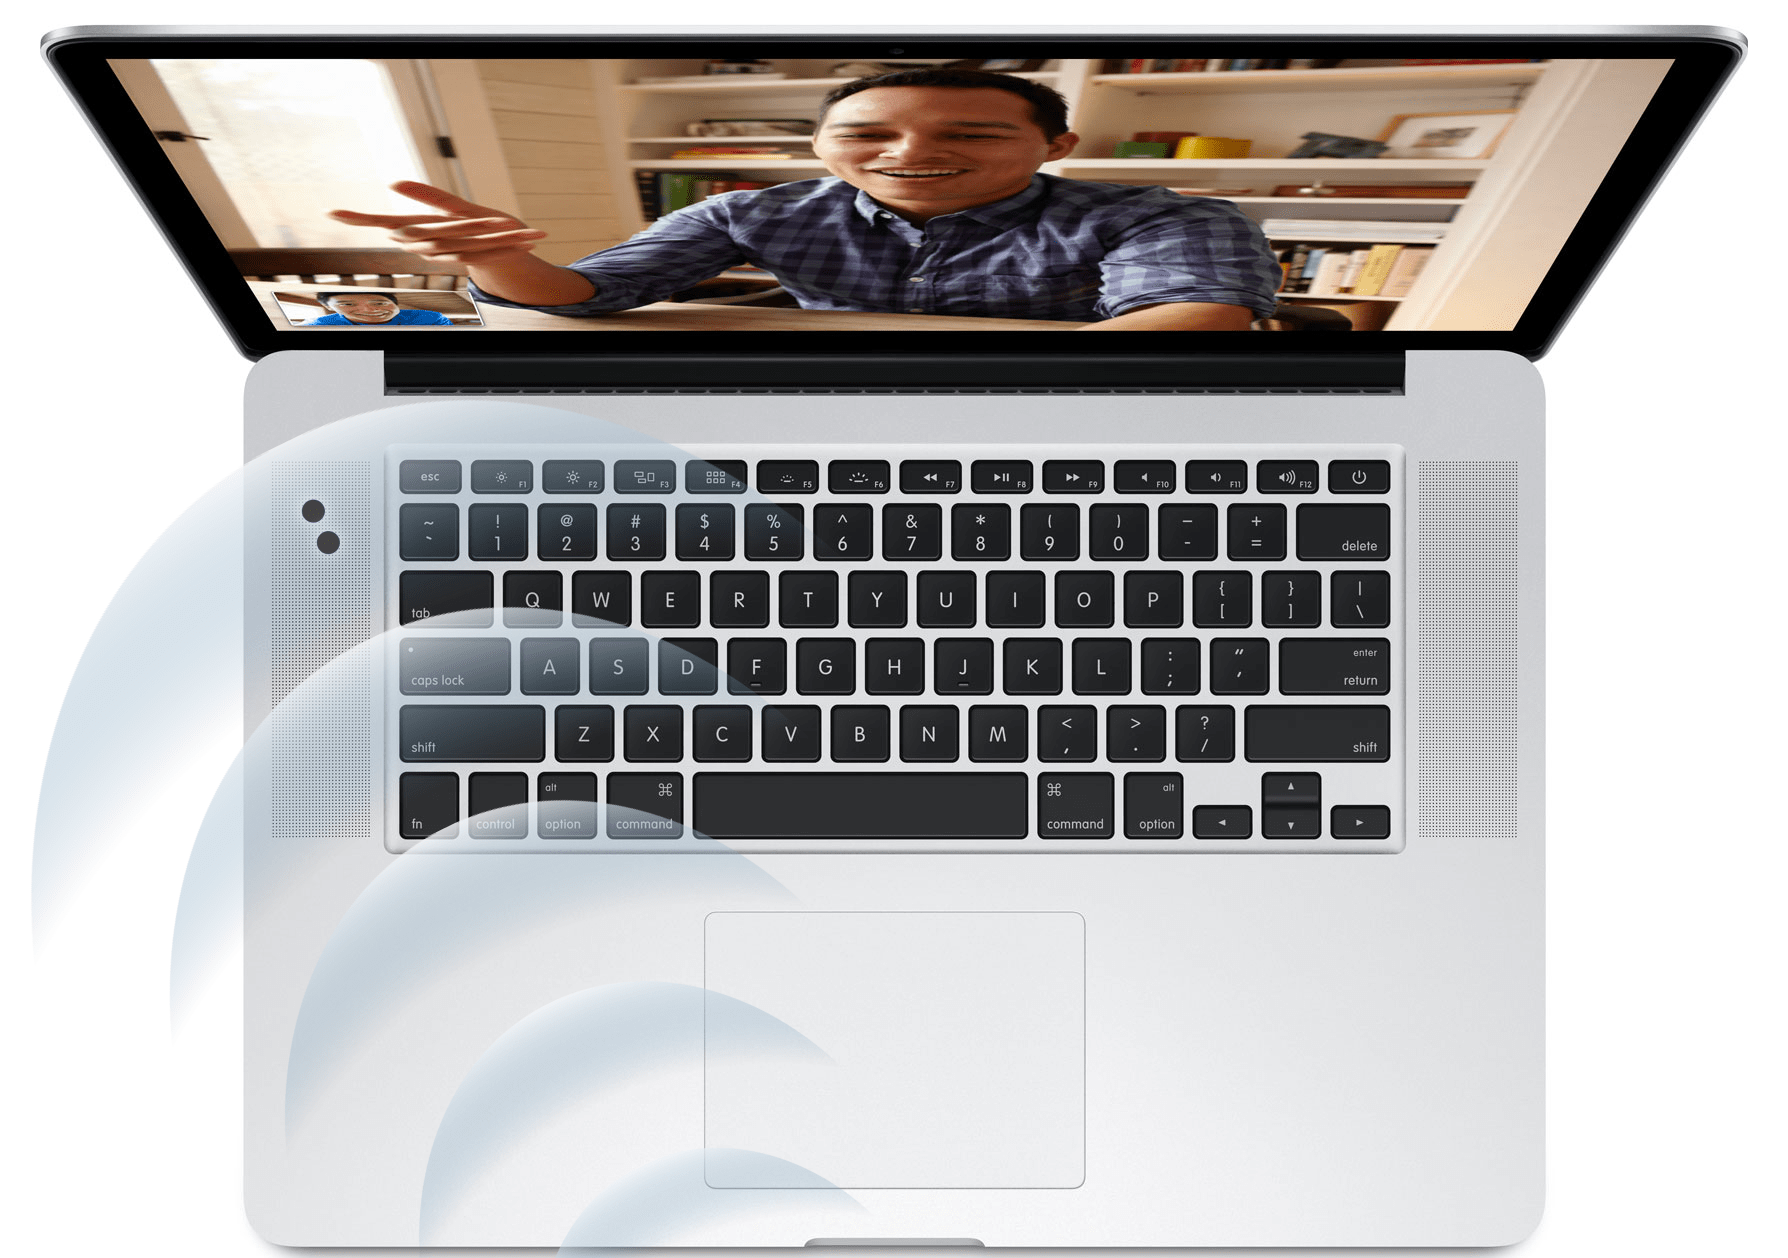 MacBook Air refresh looks set for WWDC, potentially with faster WiFi